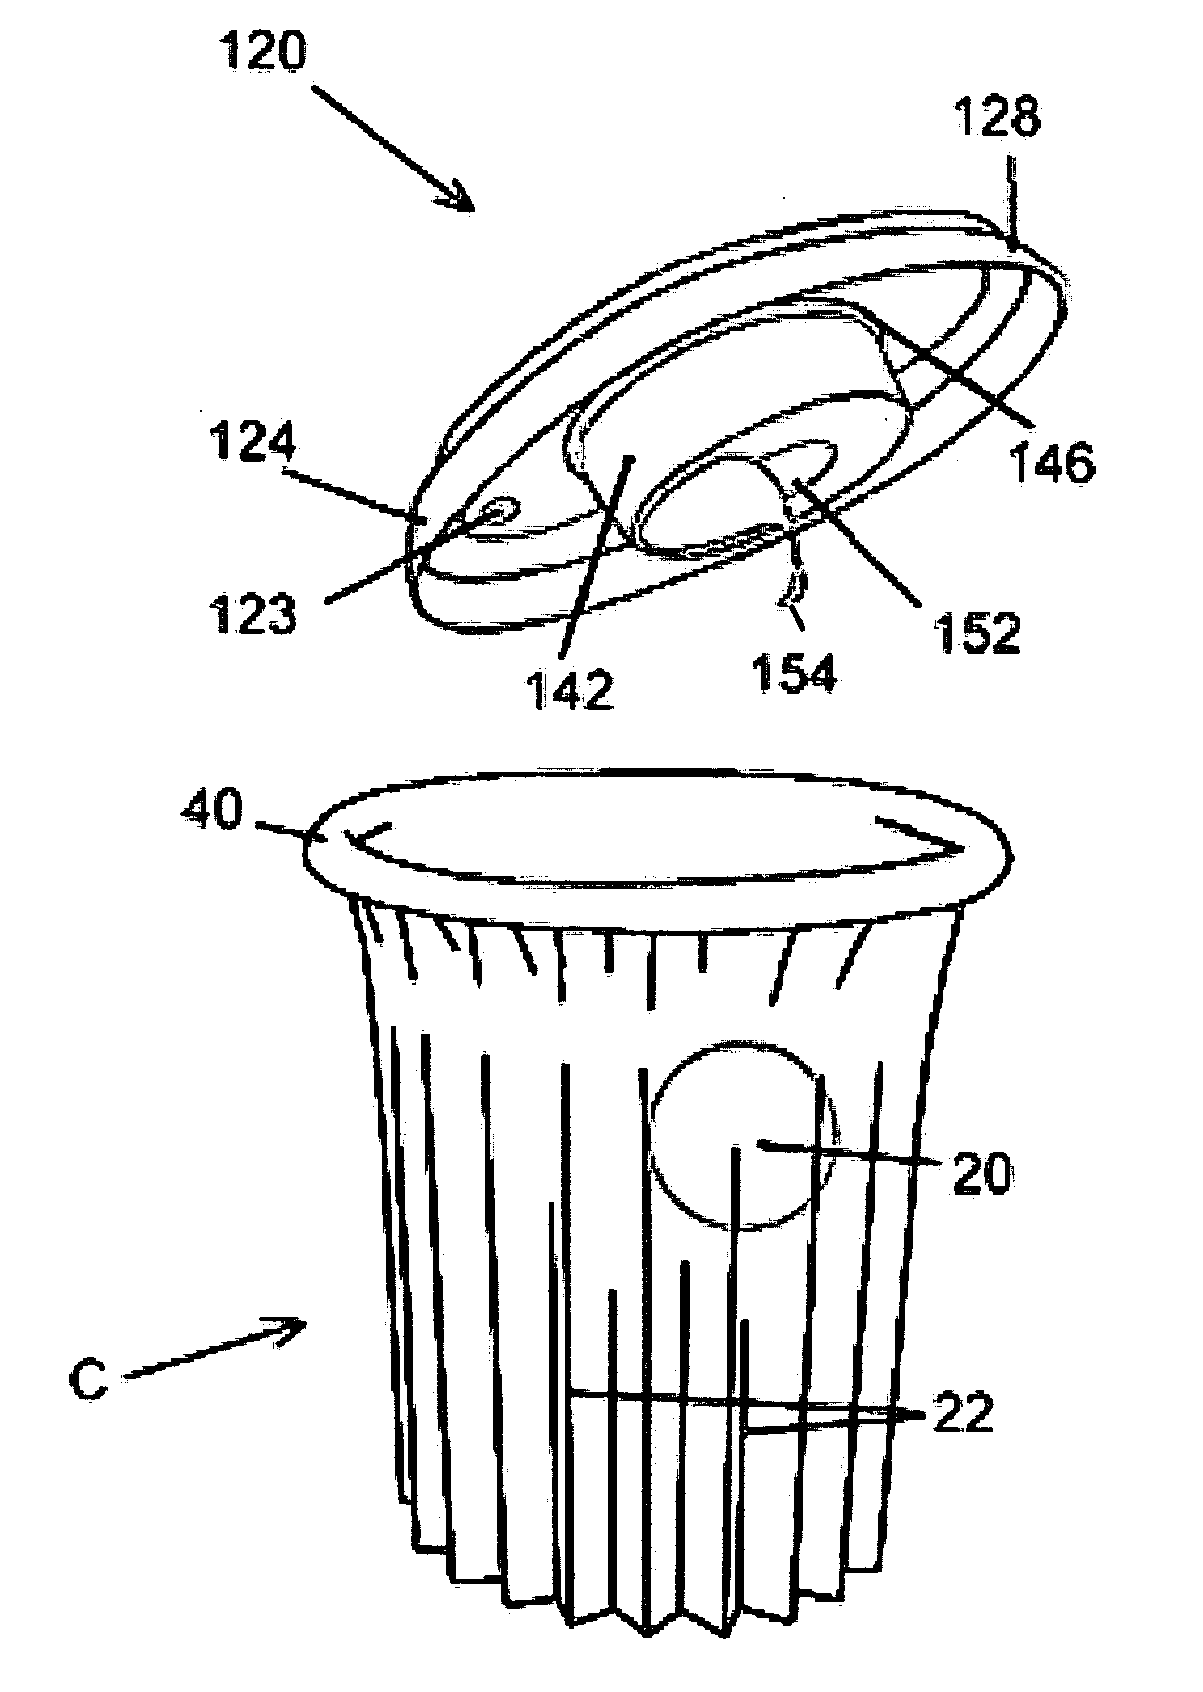 Disposable paper cups, method of making, and handling of such cups